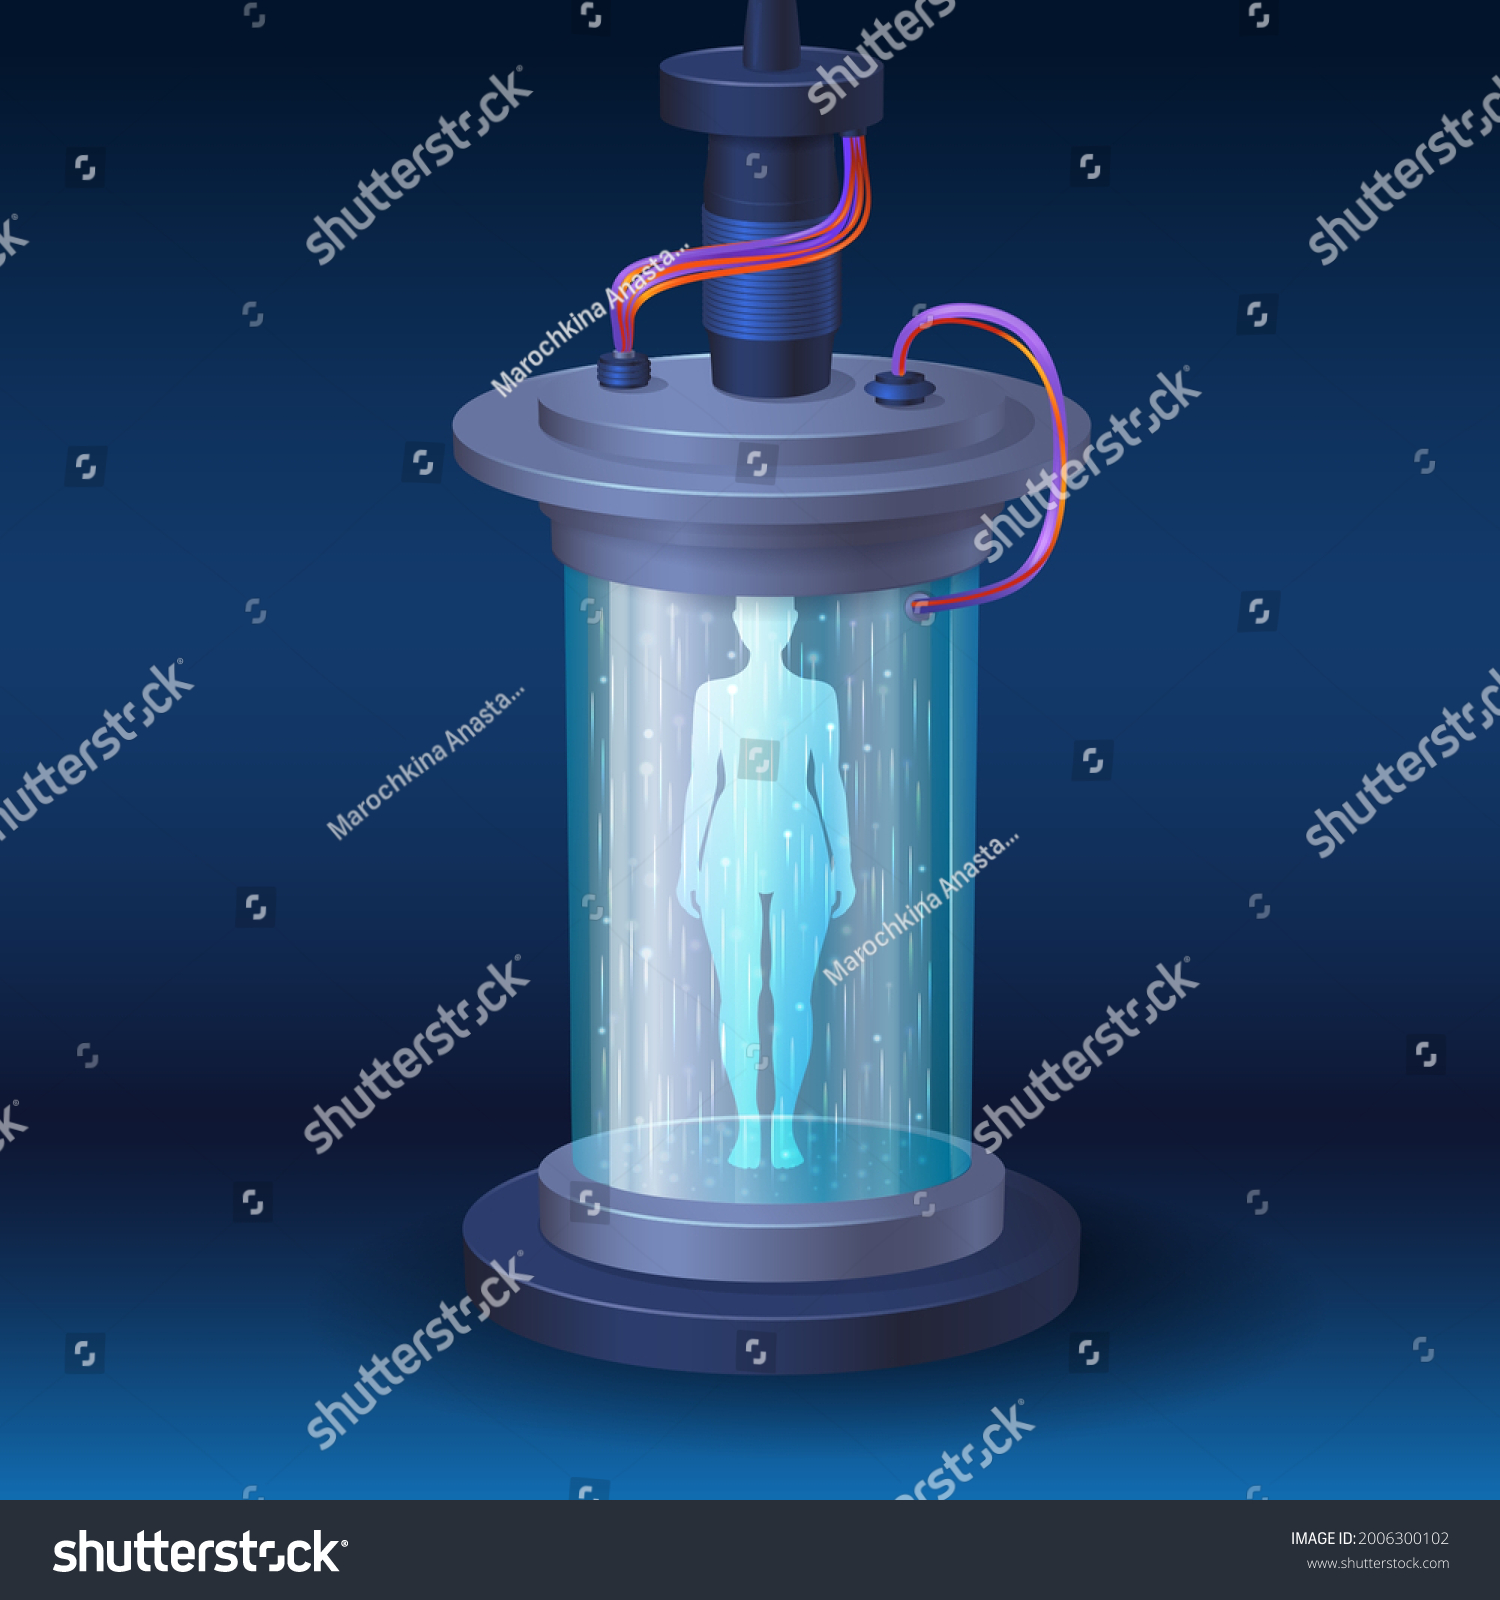 SVG of single teleport chamber with body silhouette, cryo chamber for freezing and travel on a spaceship, medical science fiction chamber concept for treatment and hibernation svg